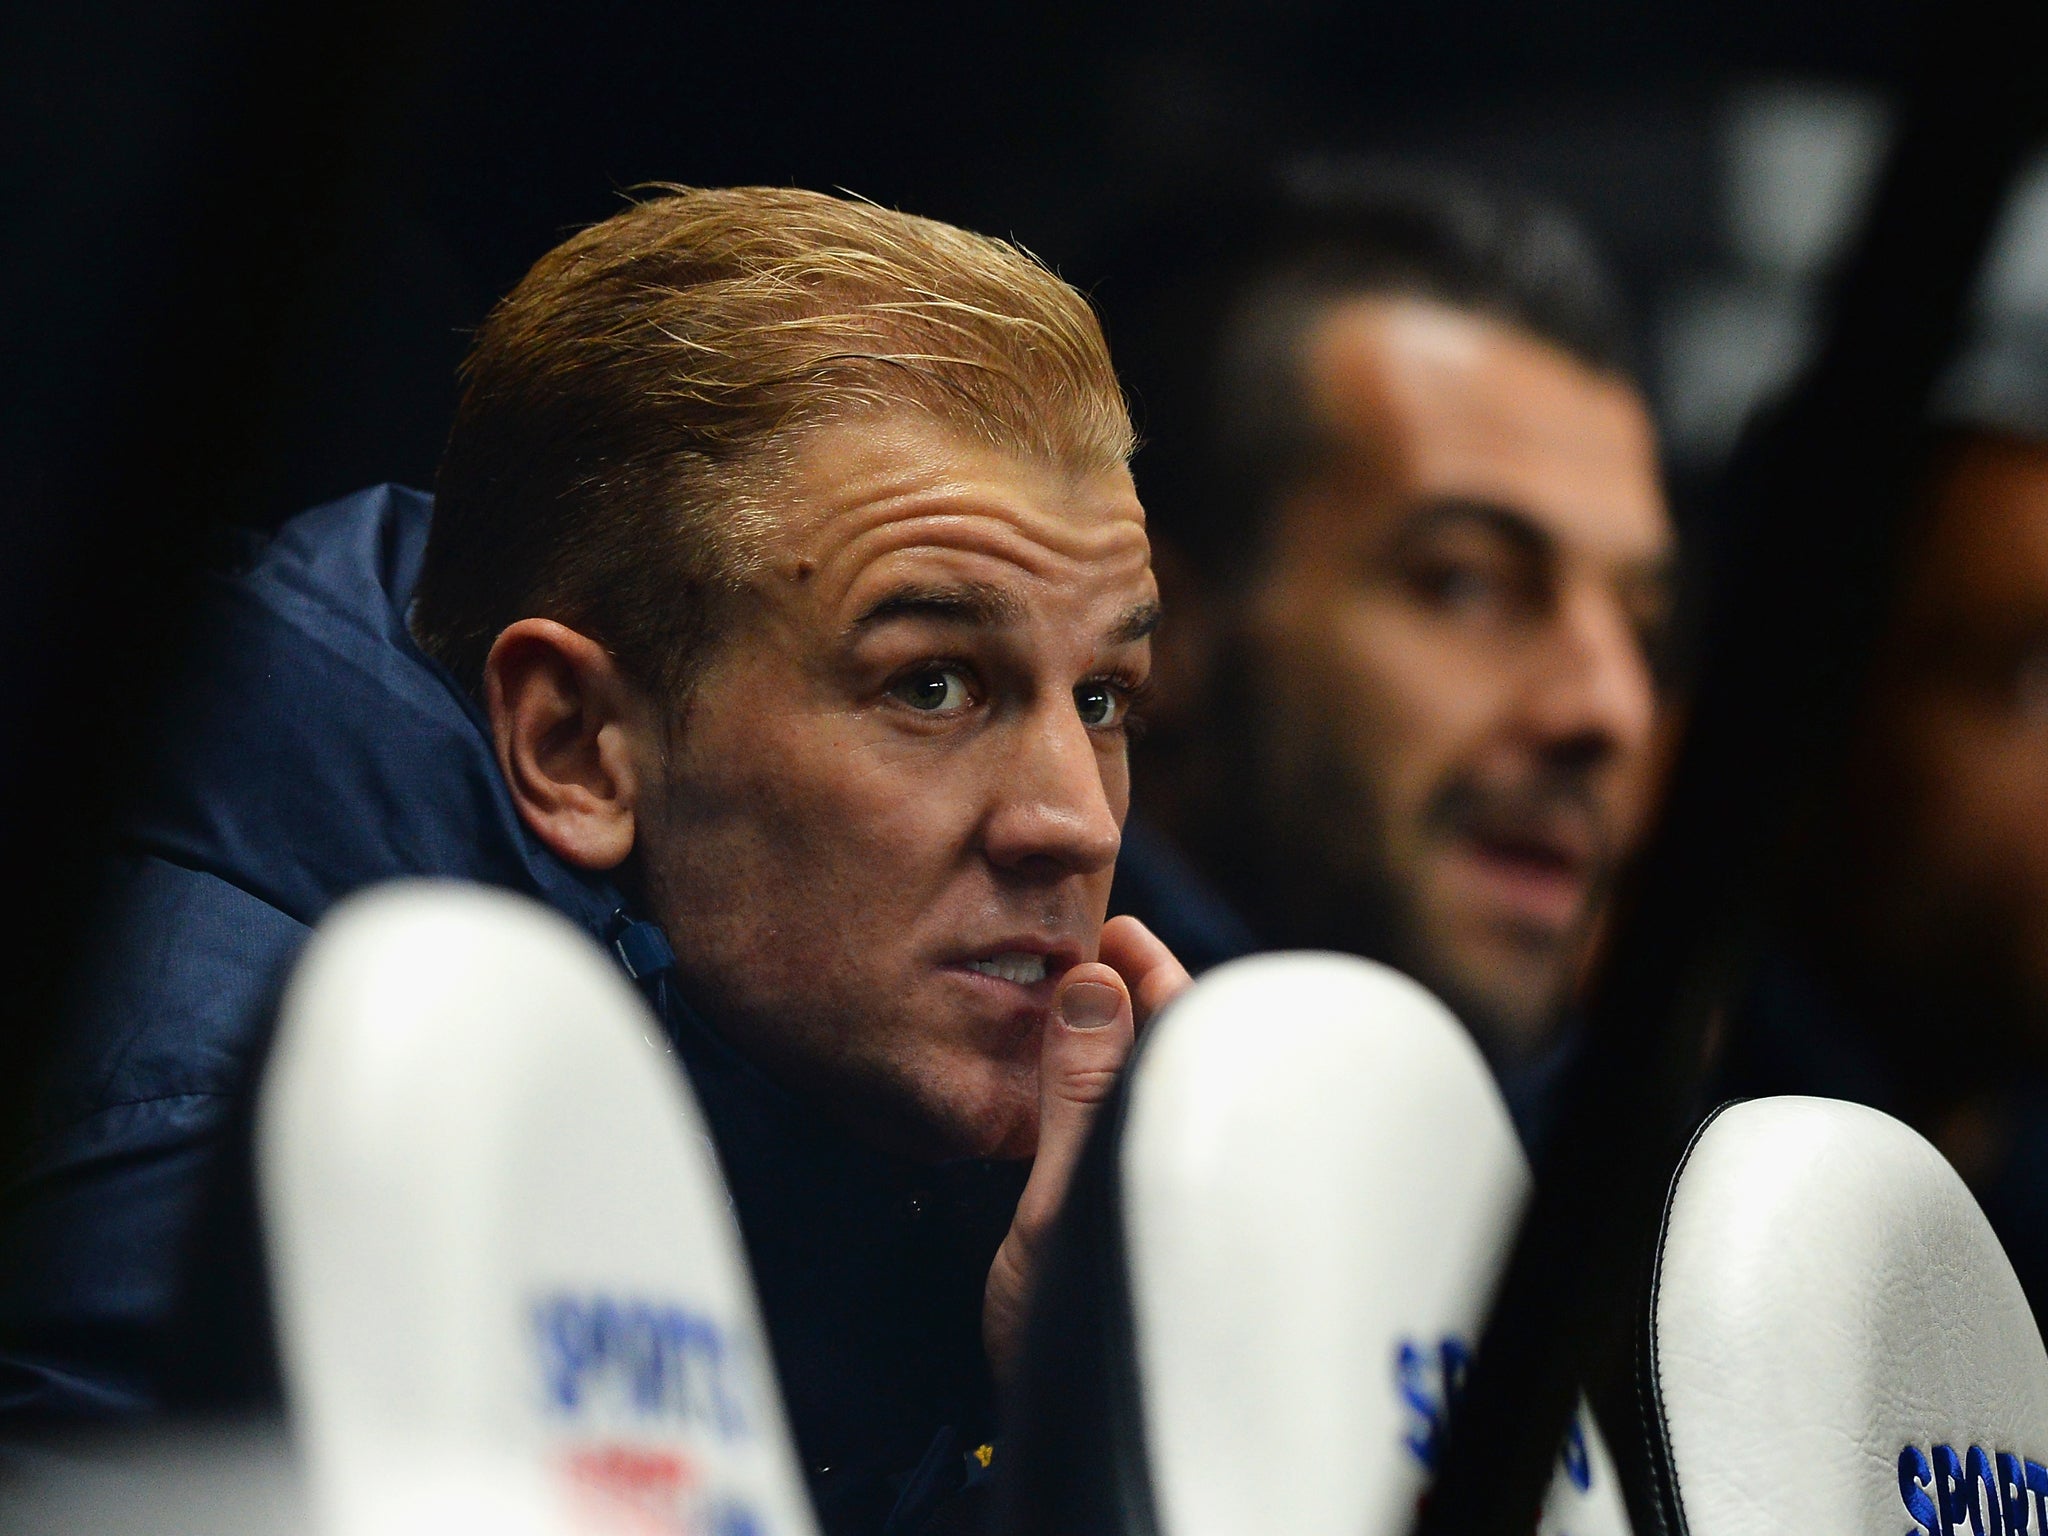 Manchester City manager Manuel Pellegrini has said that he 'trusts' goalkeeper Joe Hart to return to his best